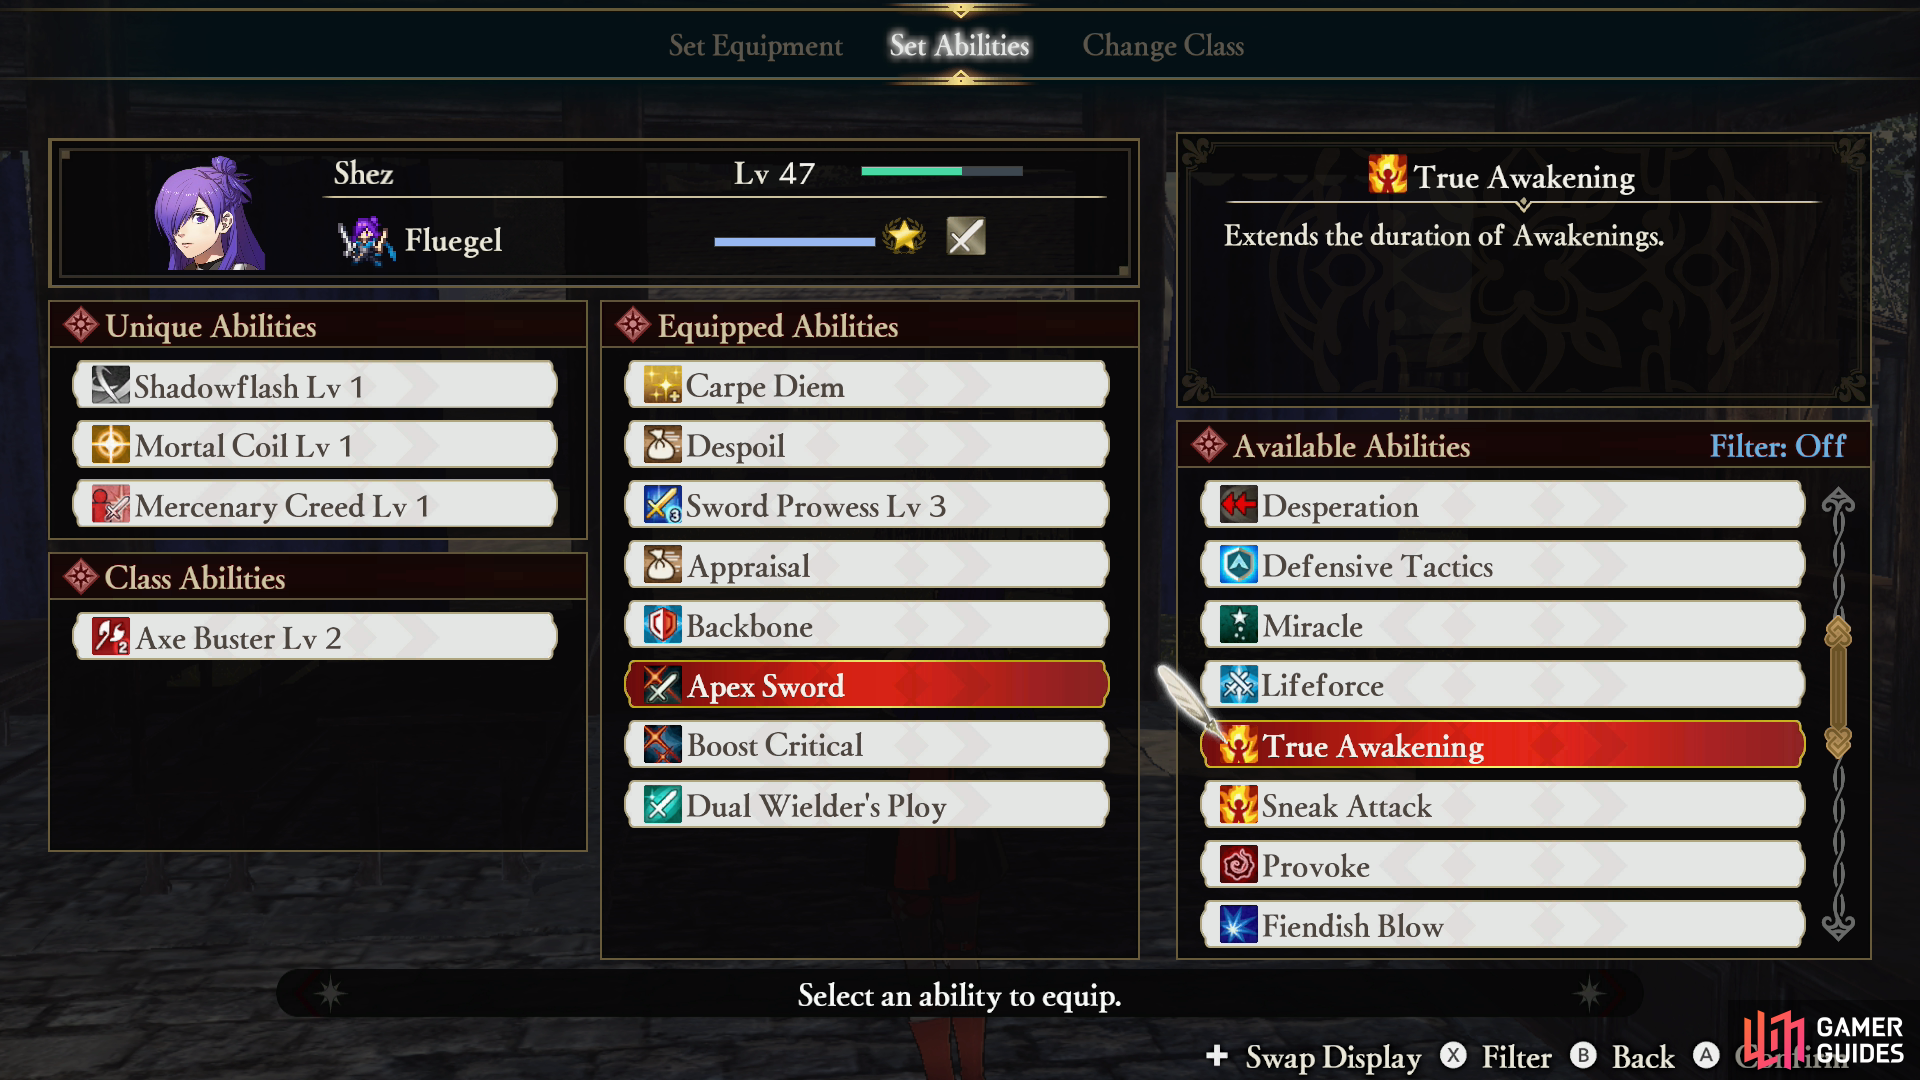 Play as a class to increase its class rank, then equip learned Abilities as you see fit.